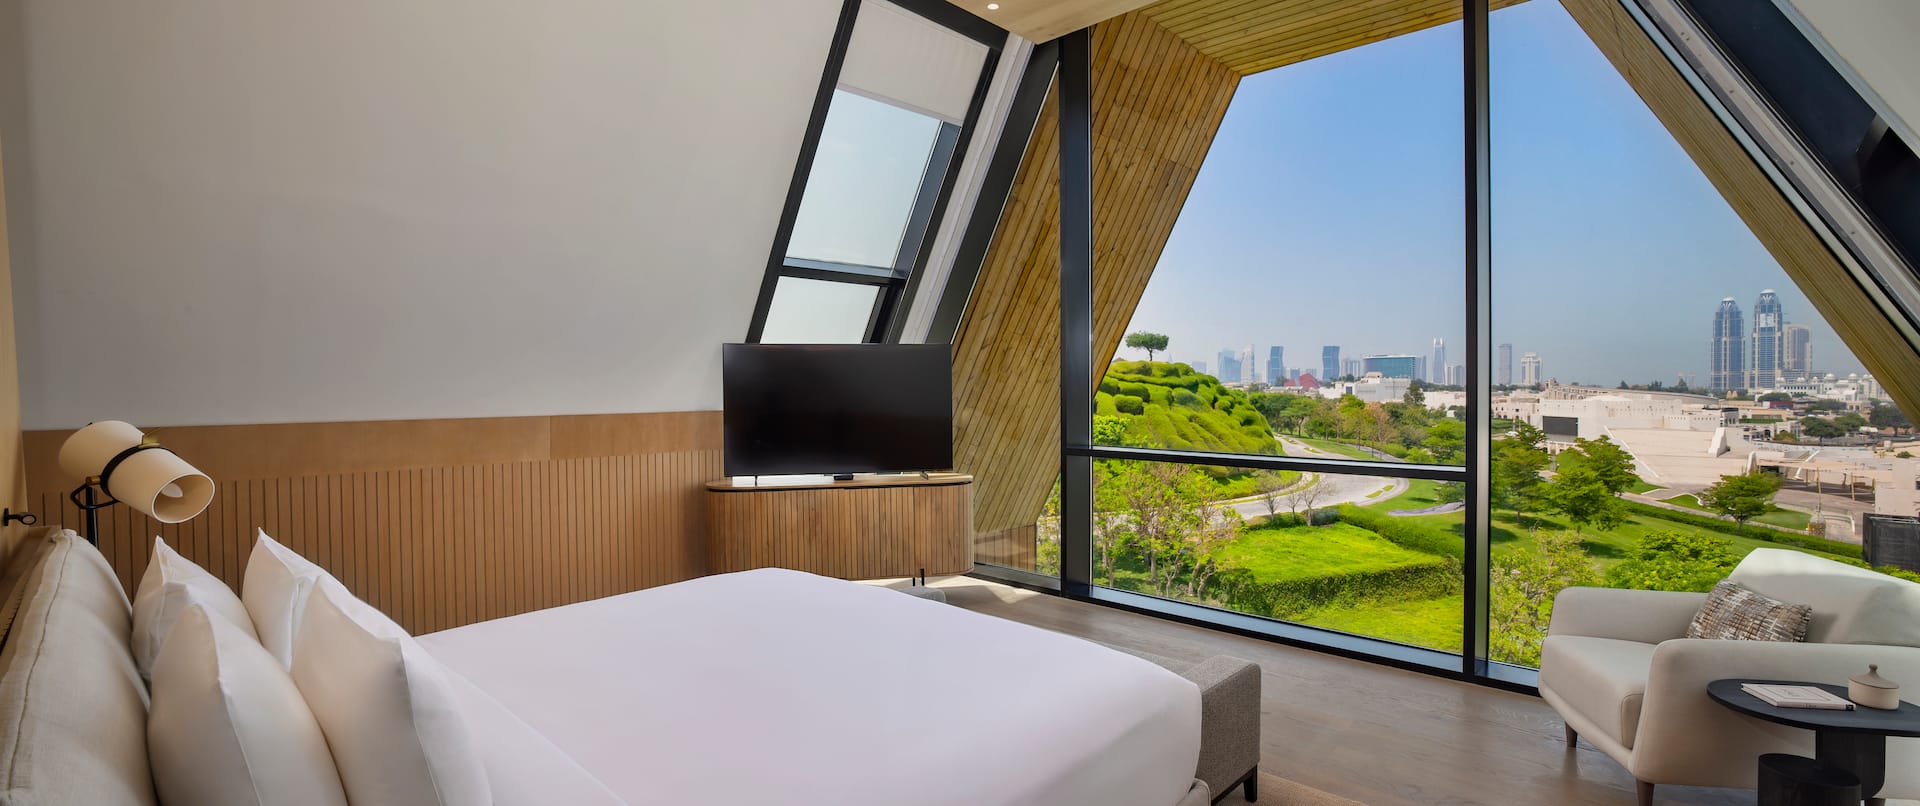 Suite Bedroom with a View